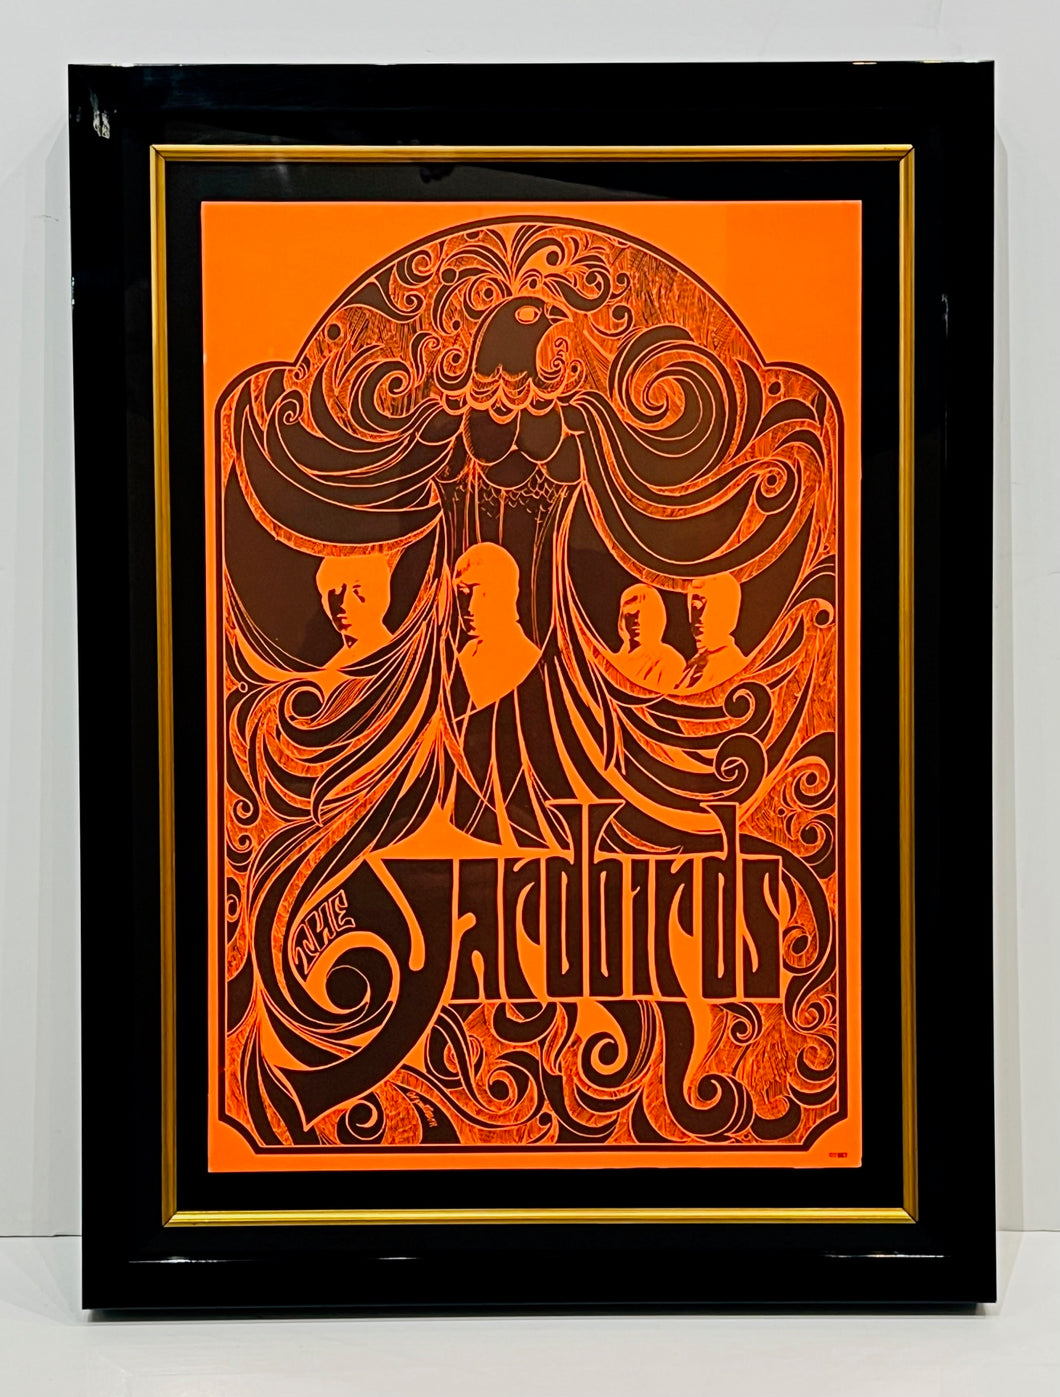 AWESOME VINTAGE ' THE YARDBIRDS ' 1967 BLACKLIGHT POSTER!